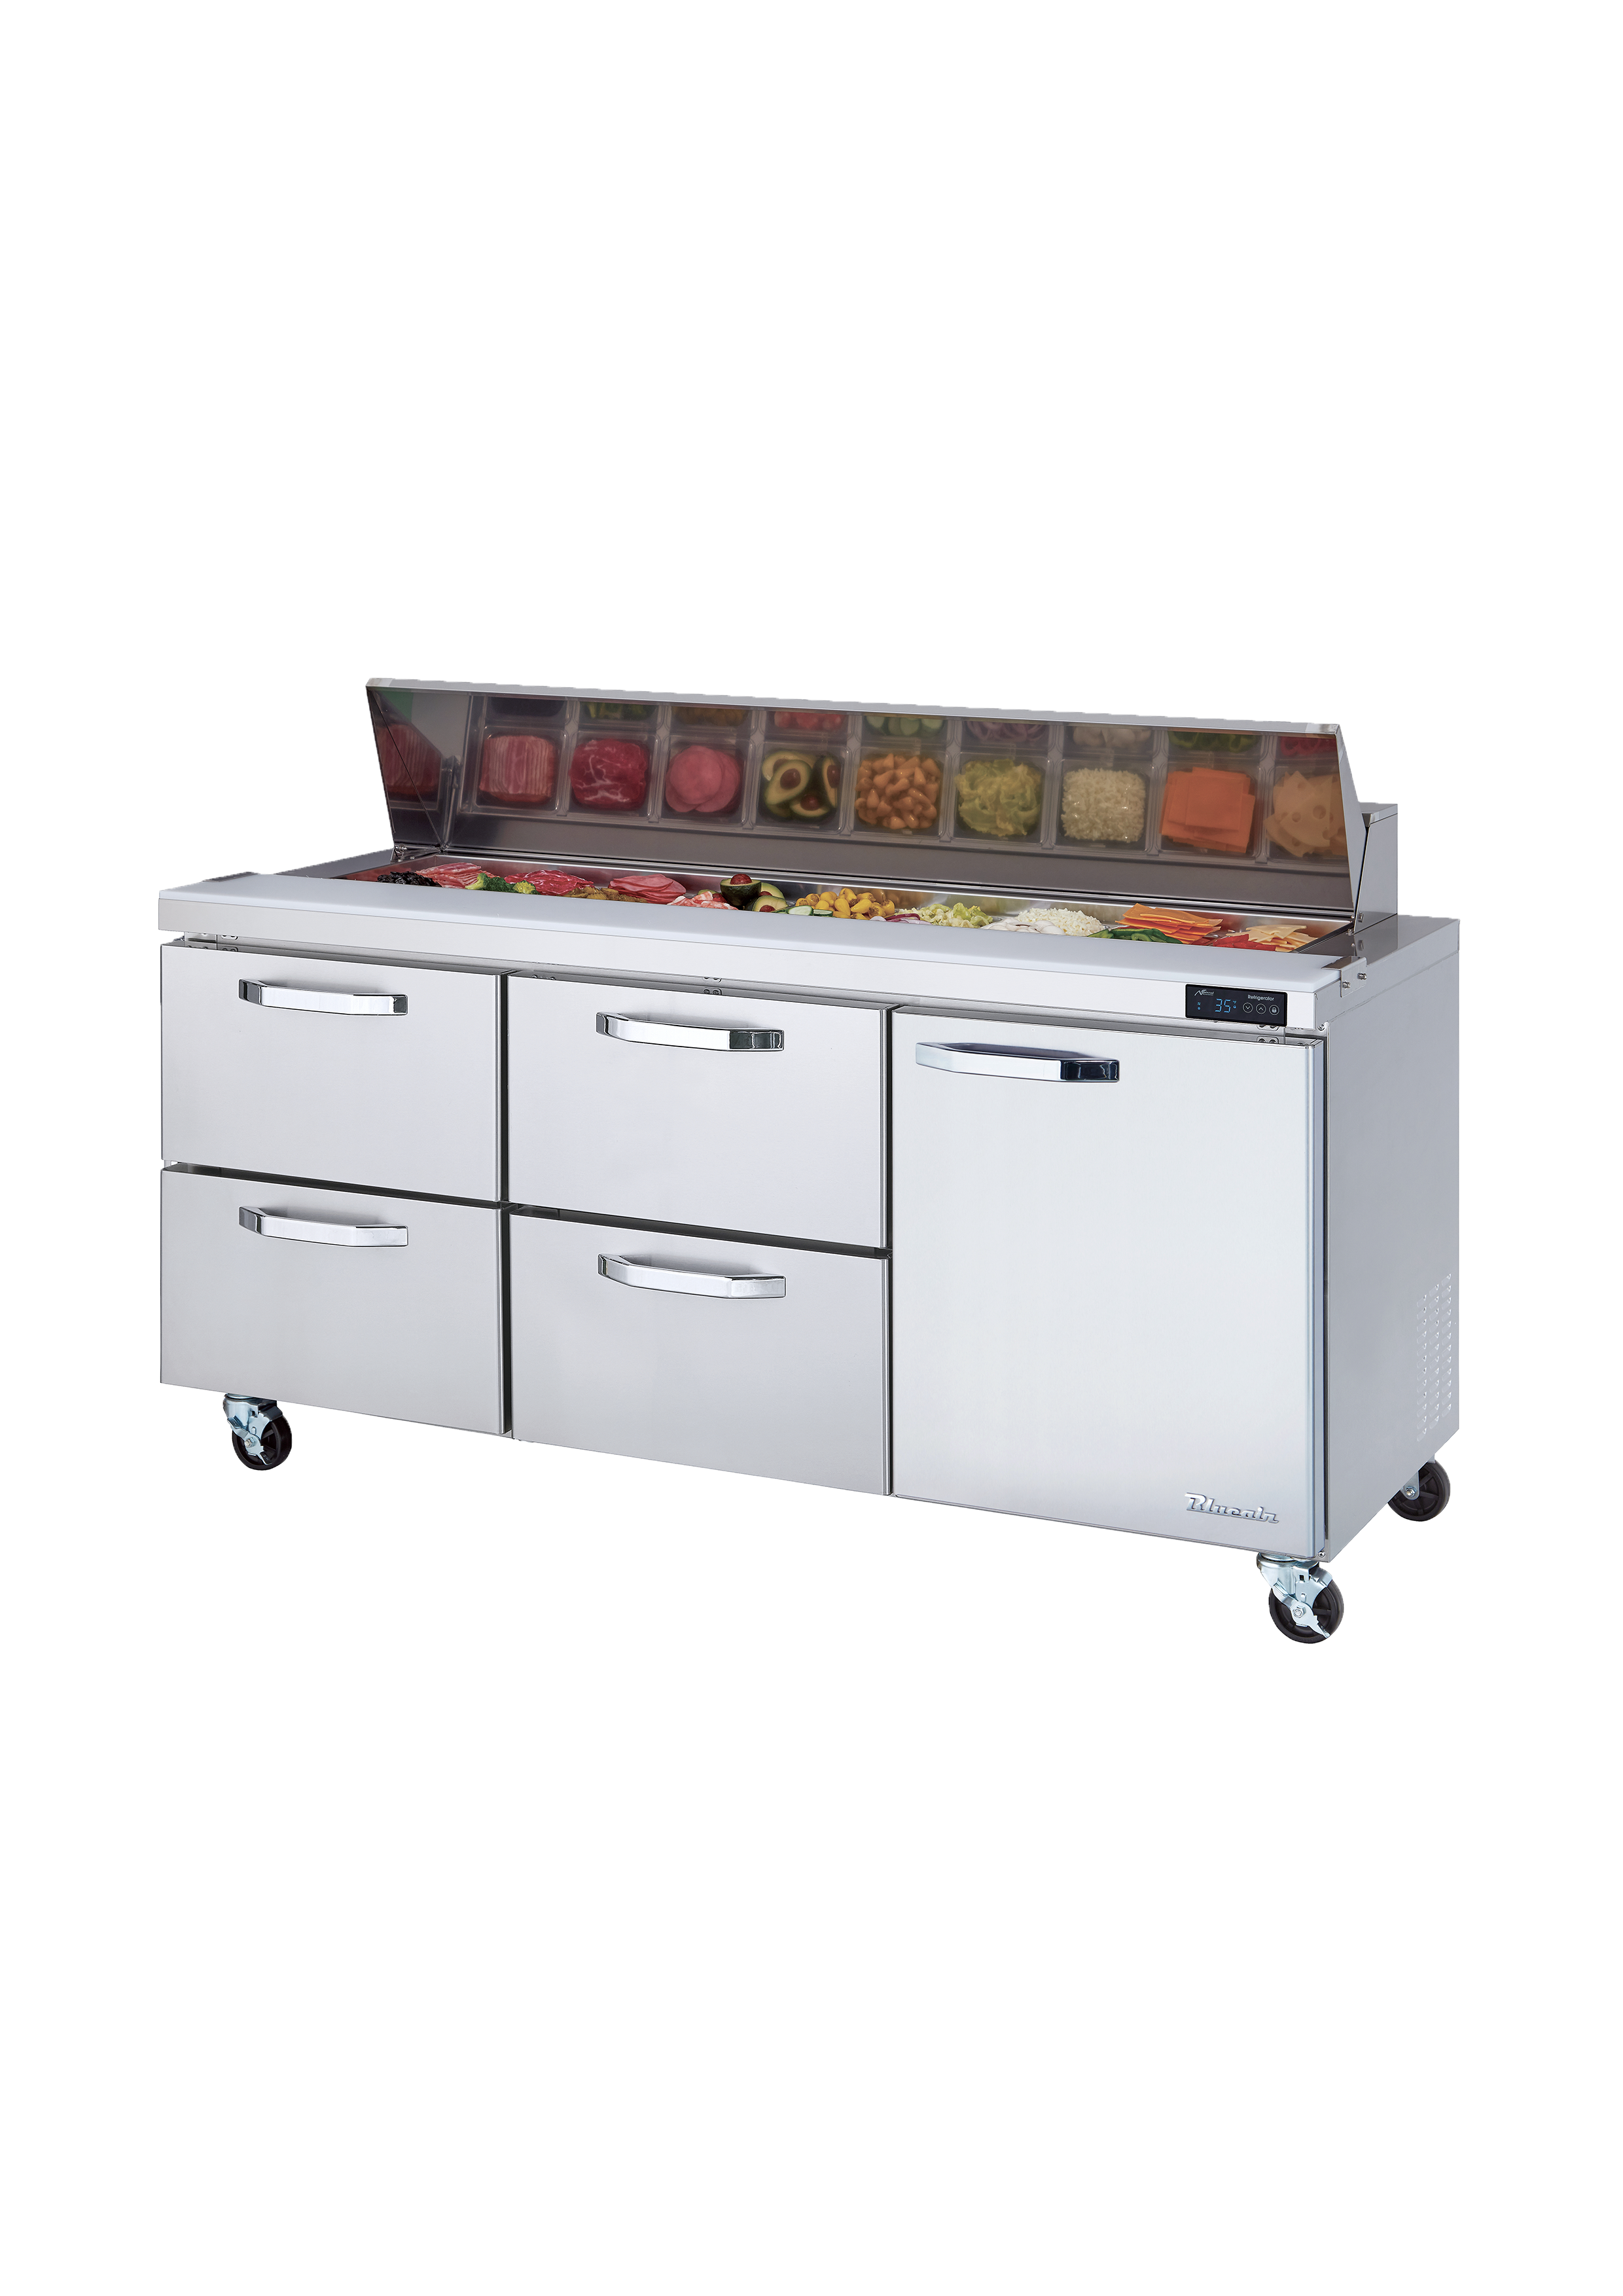 Blue Air - BLPT72-D4LM-HC, 4 Drawers 1 Door (R) All Stainless Prep. Table with (18) 1/6 Pans - 72" wide, 20 cu/ft., R-290 Refrigerant